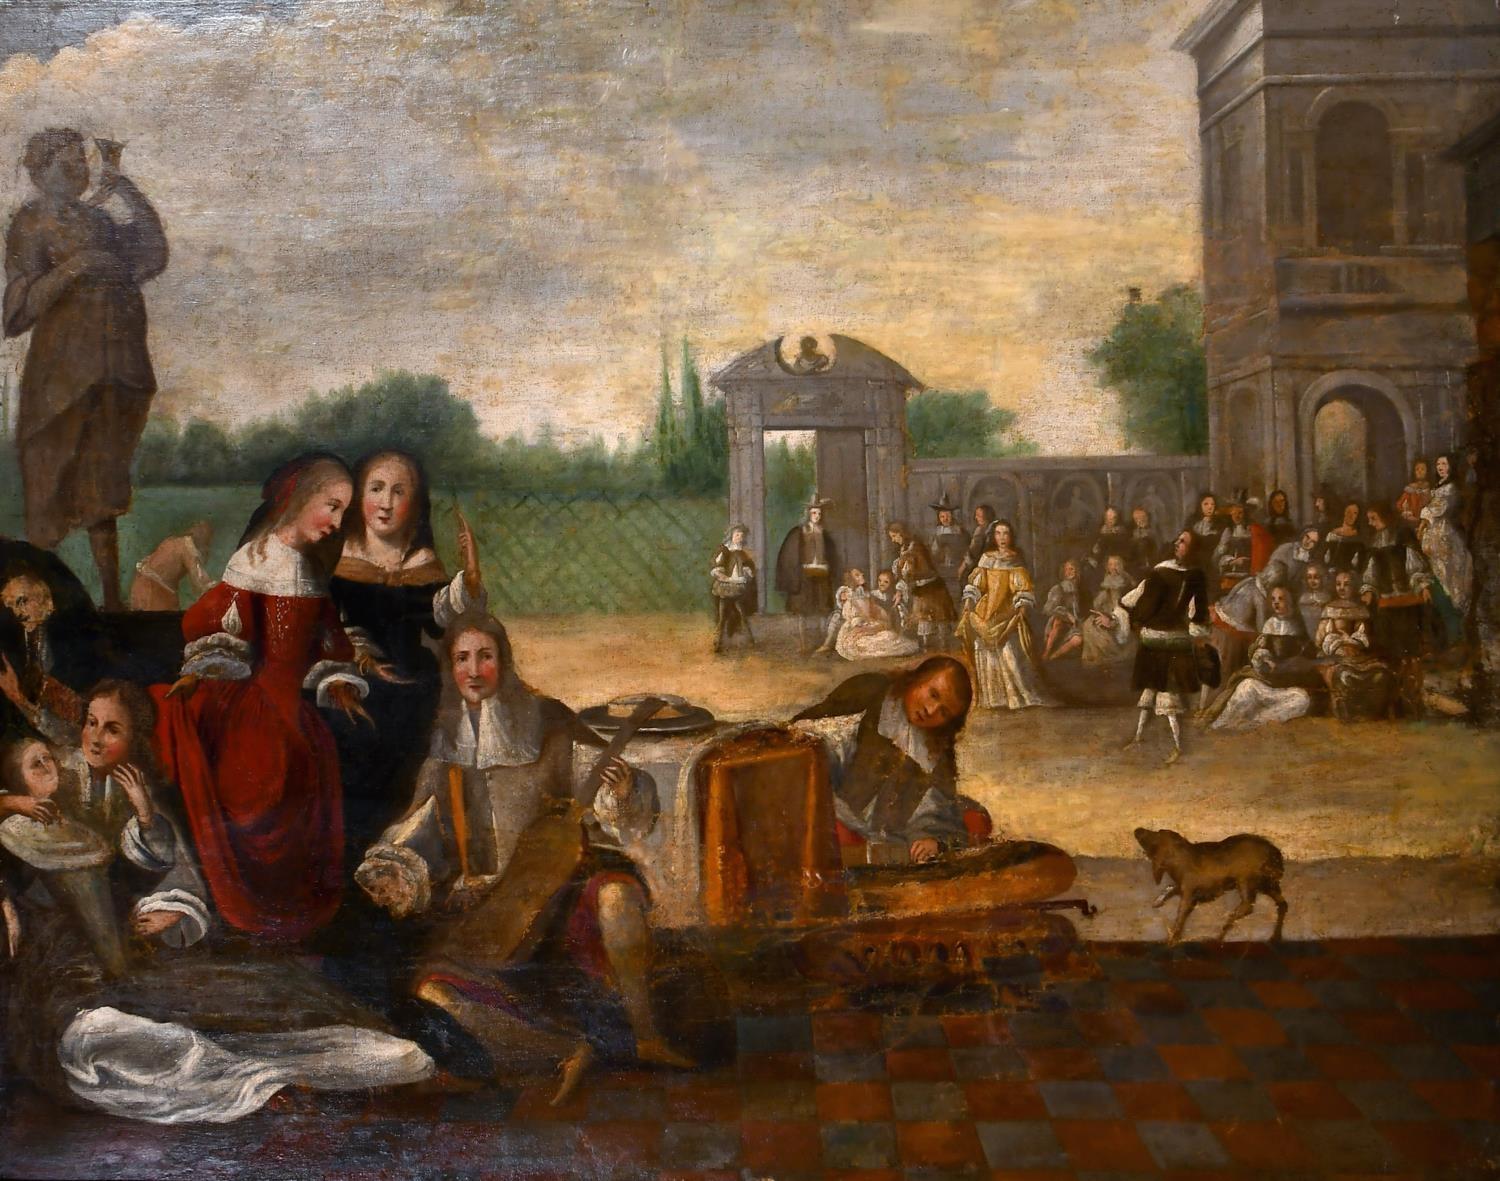 Unknown Figurative Painting - Huge 1700's Dutch Old Master Oil Painting Elegant Court Figures Musical Soiree